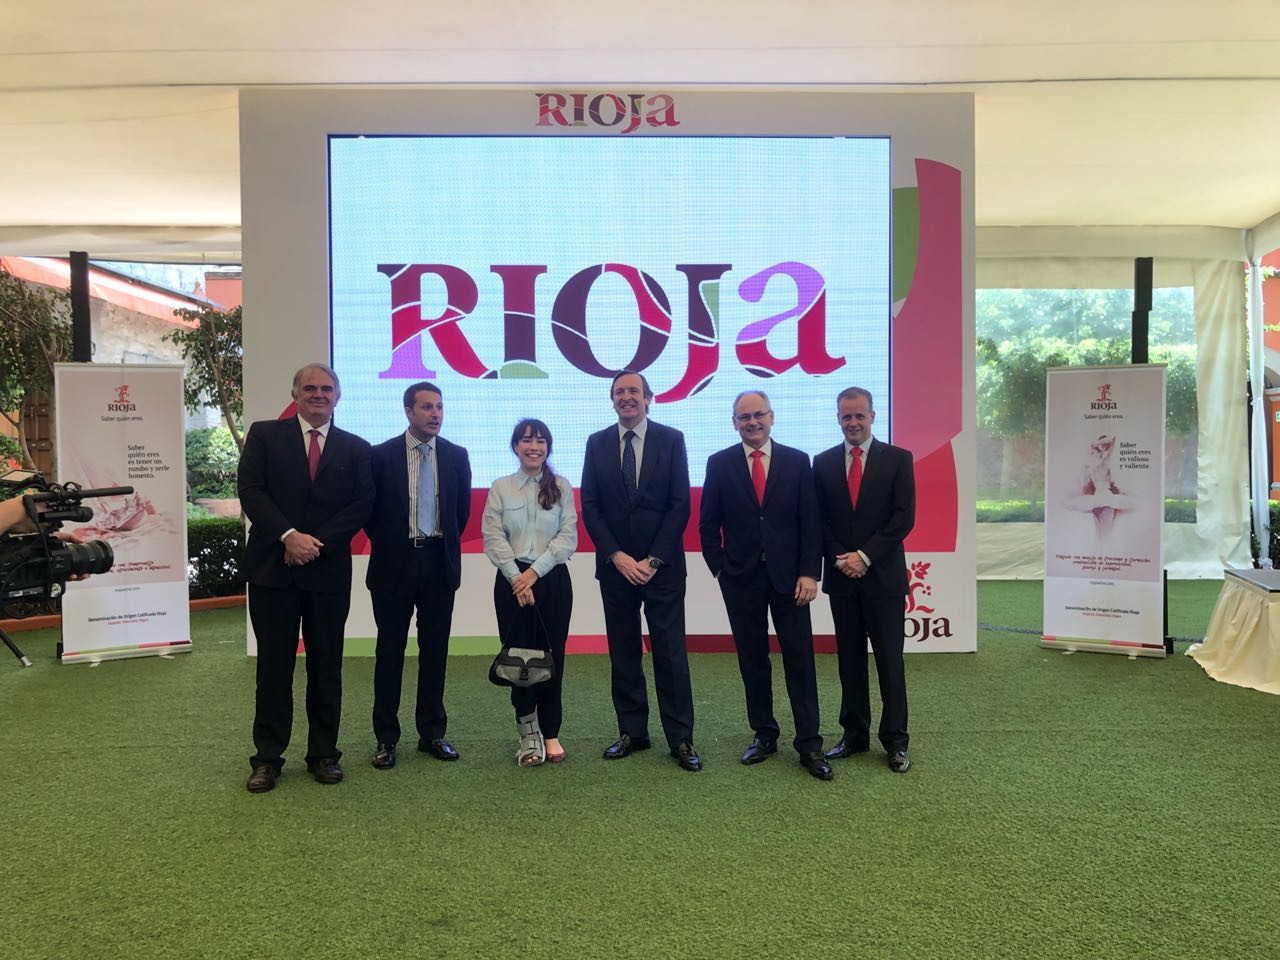 An amazing welcome for Rioja’s new image in Mexico